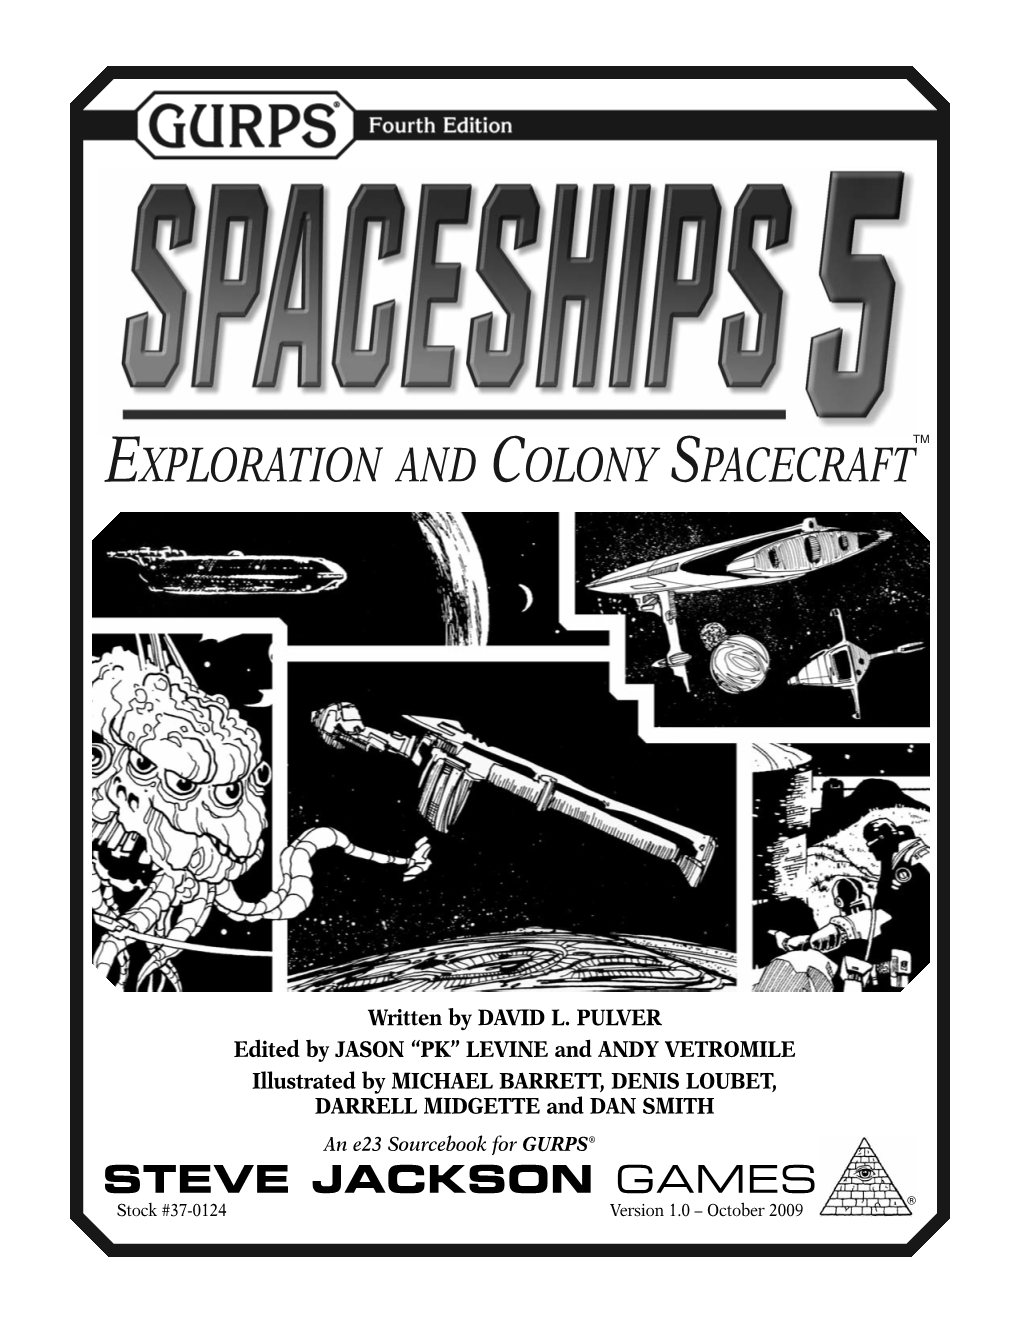 GURPS Spaceships 5: Exploration and Colony Spacecraft Is One Probes and Manned Exploration and Survey of Several Books in the GURPS Spaceships Series